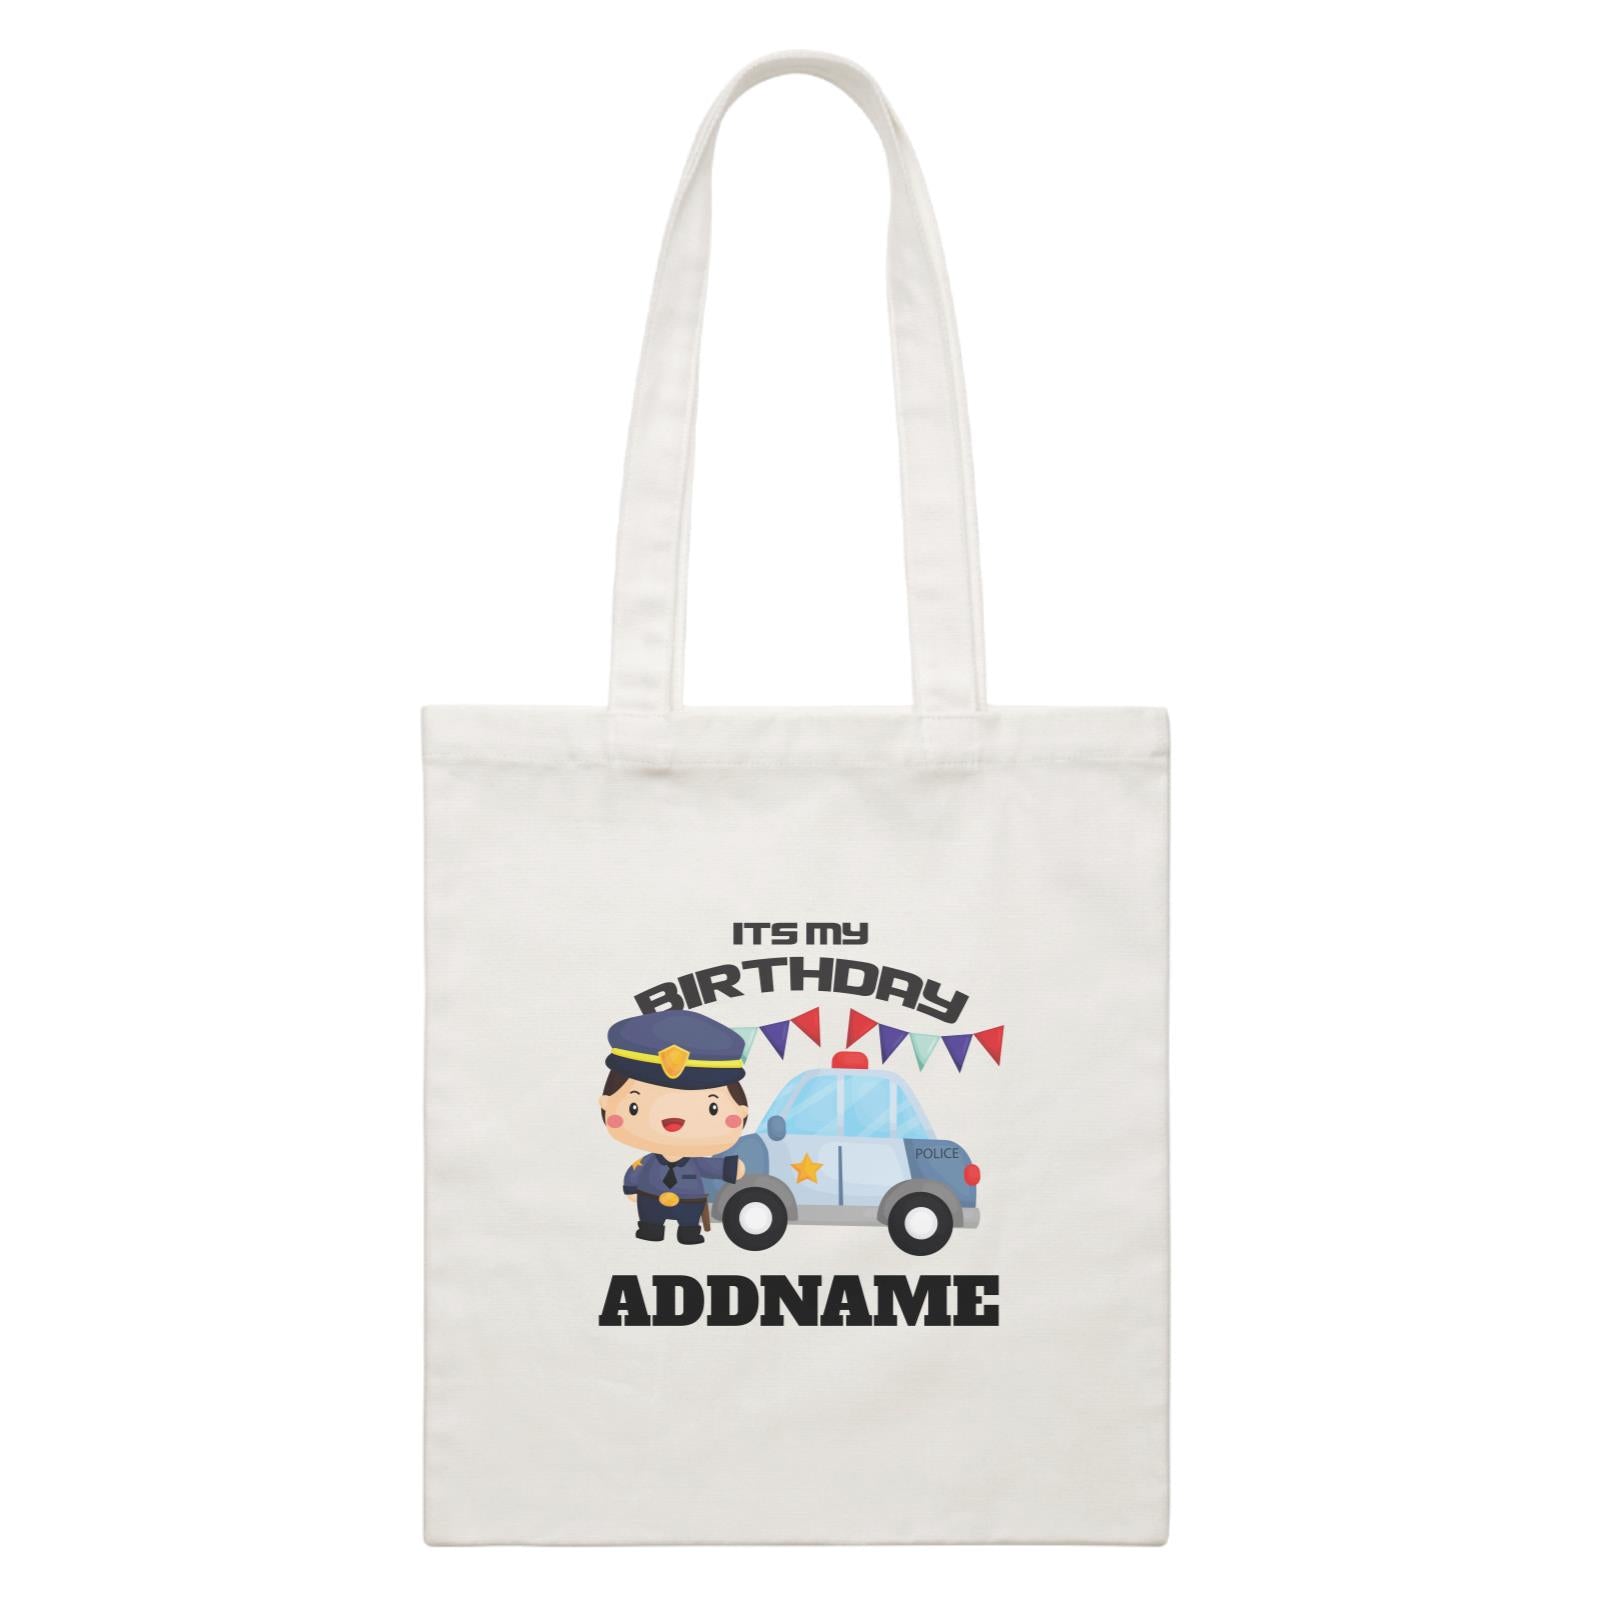 Birthday Police Officer Boy In Suit With Police Car Its My Birthday Addname White Canvas Bag